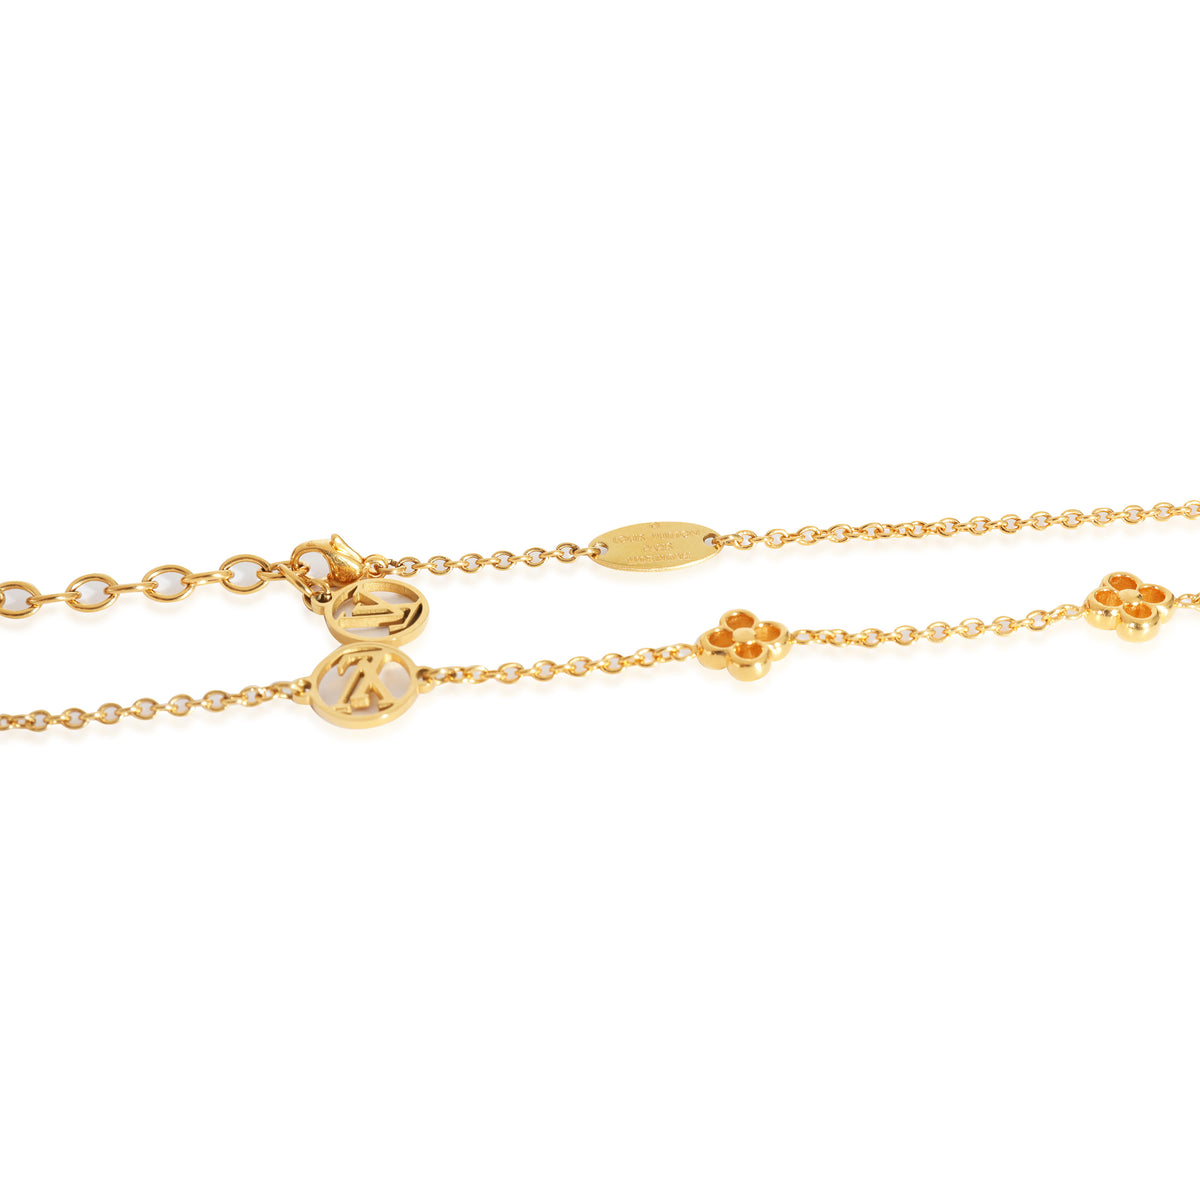 Louis Vuitton Blooming Strass Necklace - Gold-Tone Metal Chain, Necklaces -  LOU500960